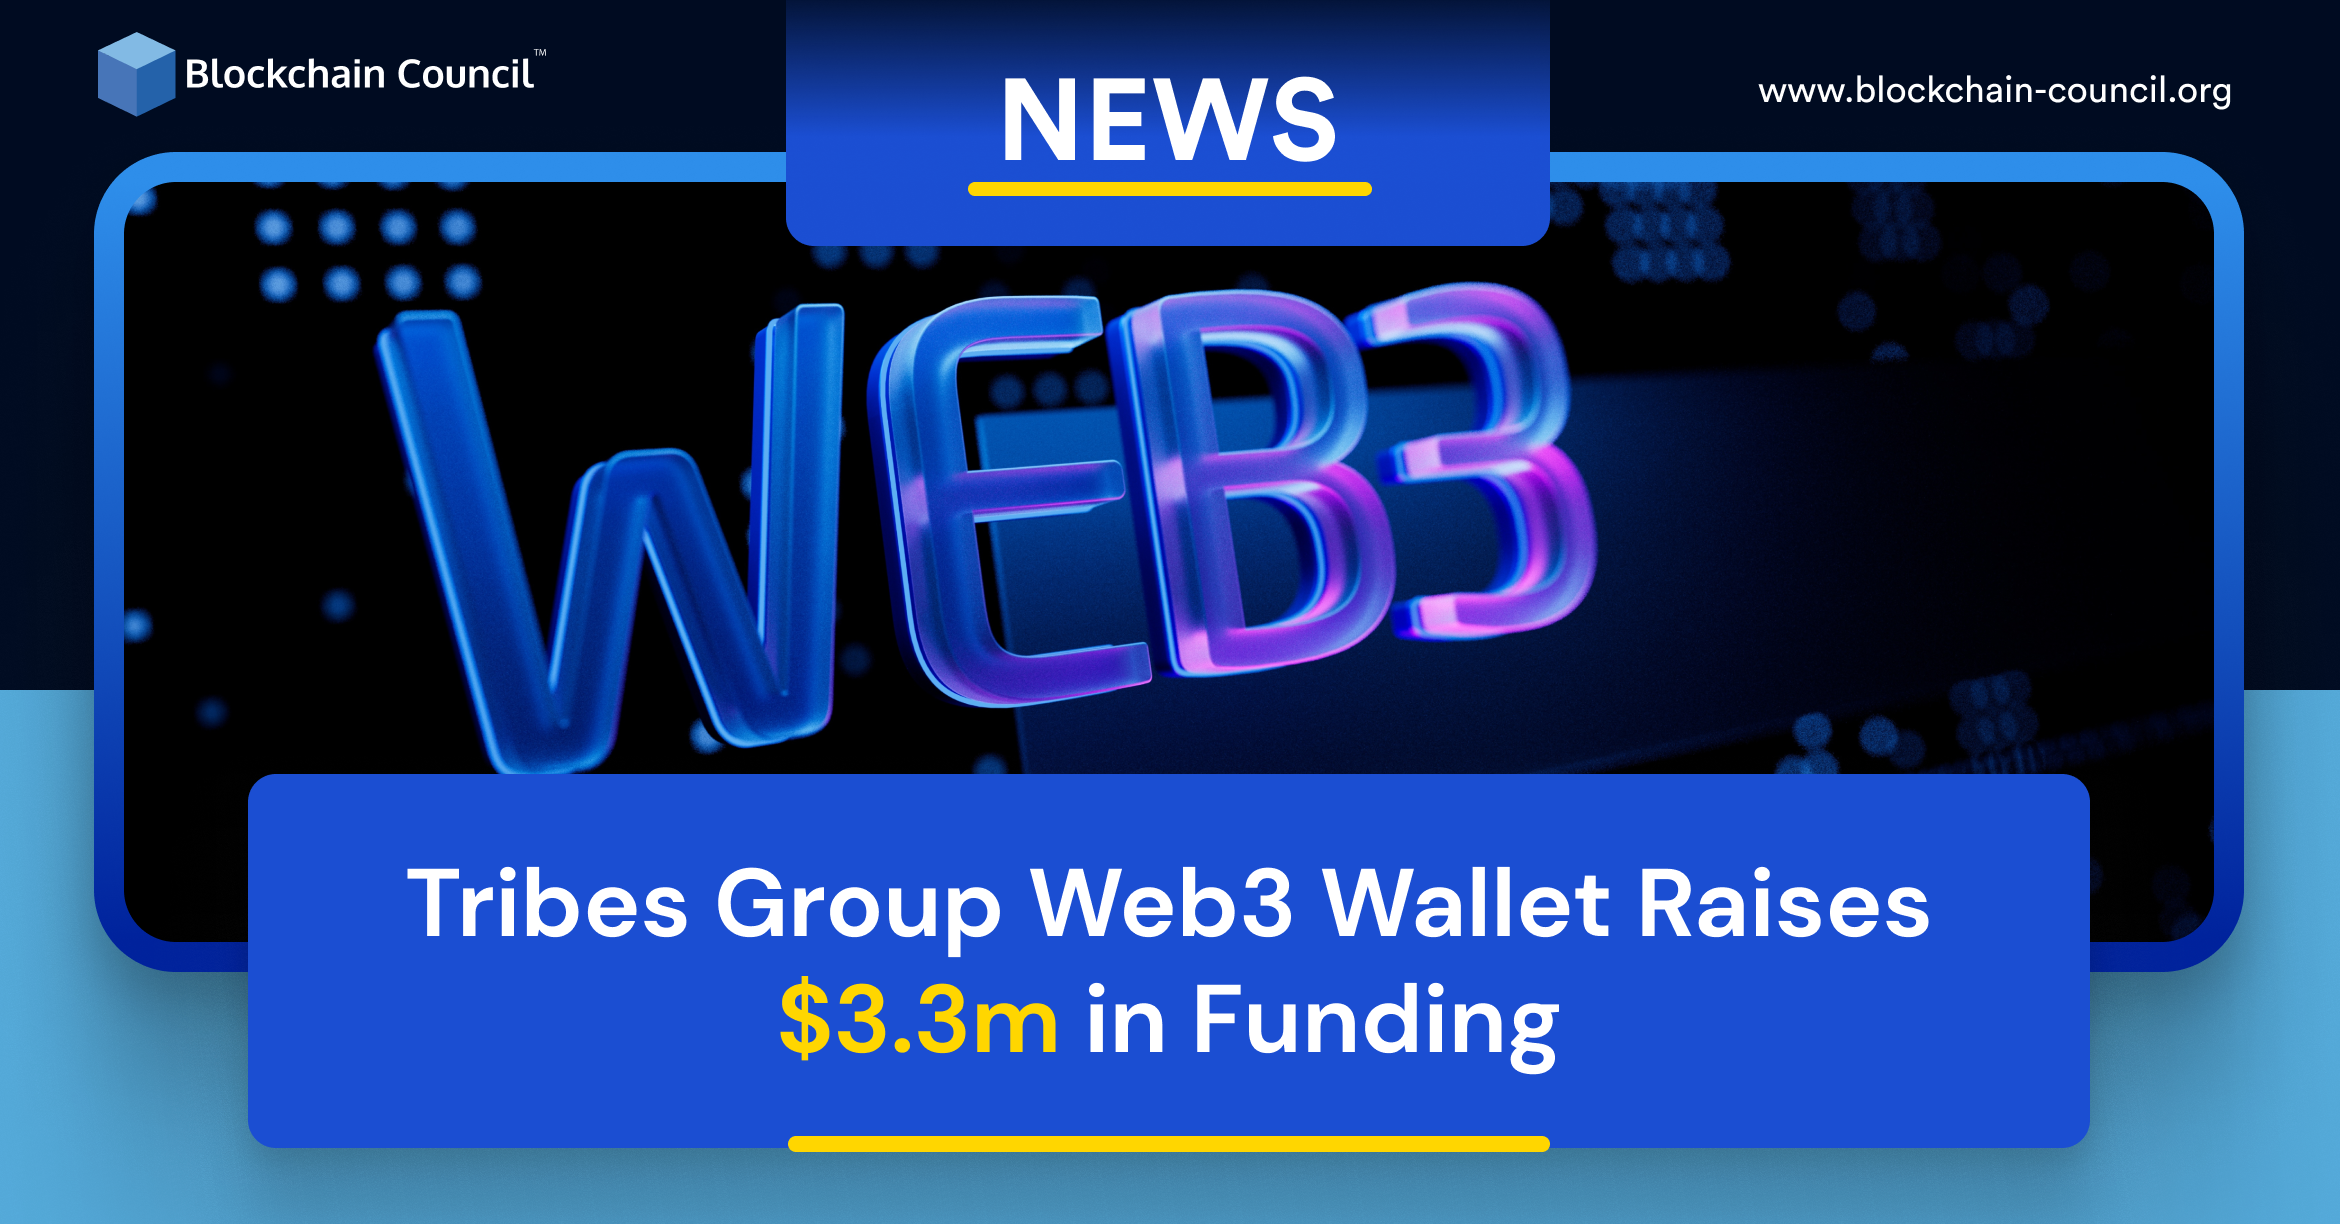 Tribes Group Web3 Wallet Raises $3.3m in Funding